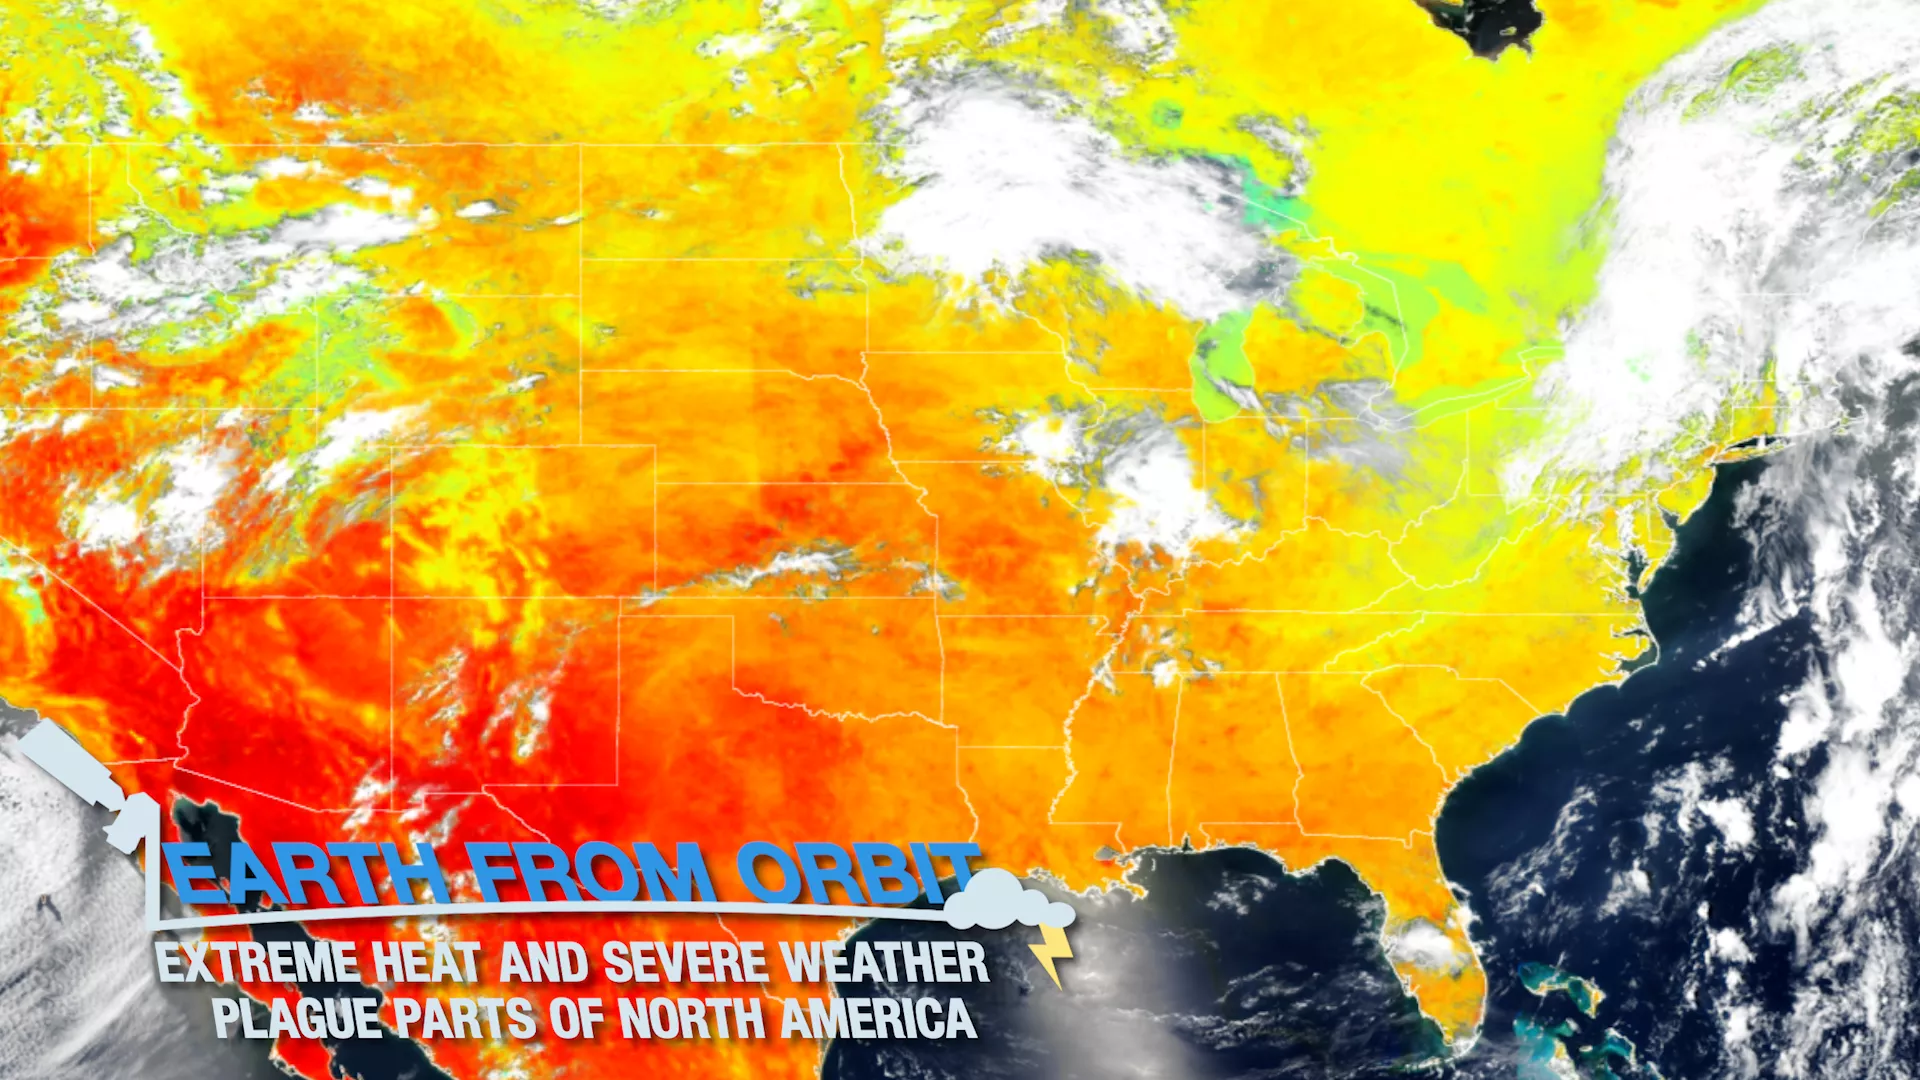 Extreme Heat and Severe Weather Plague Parts of North America